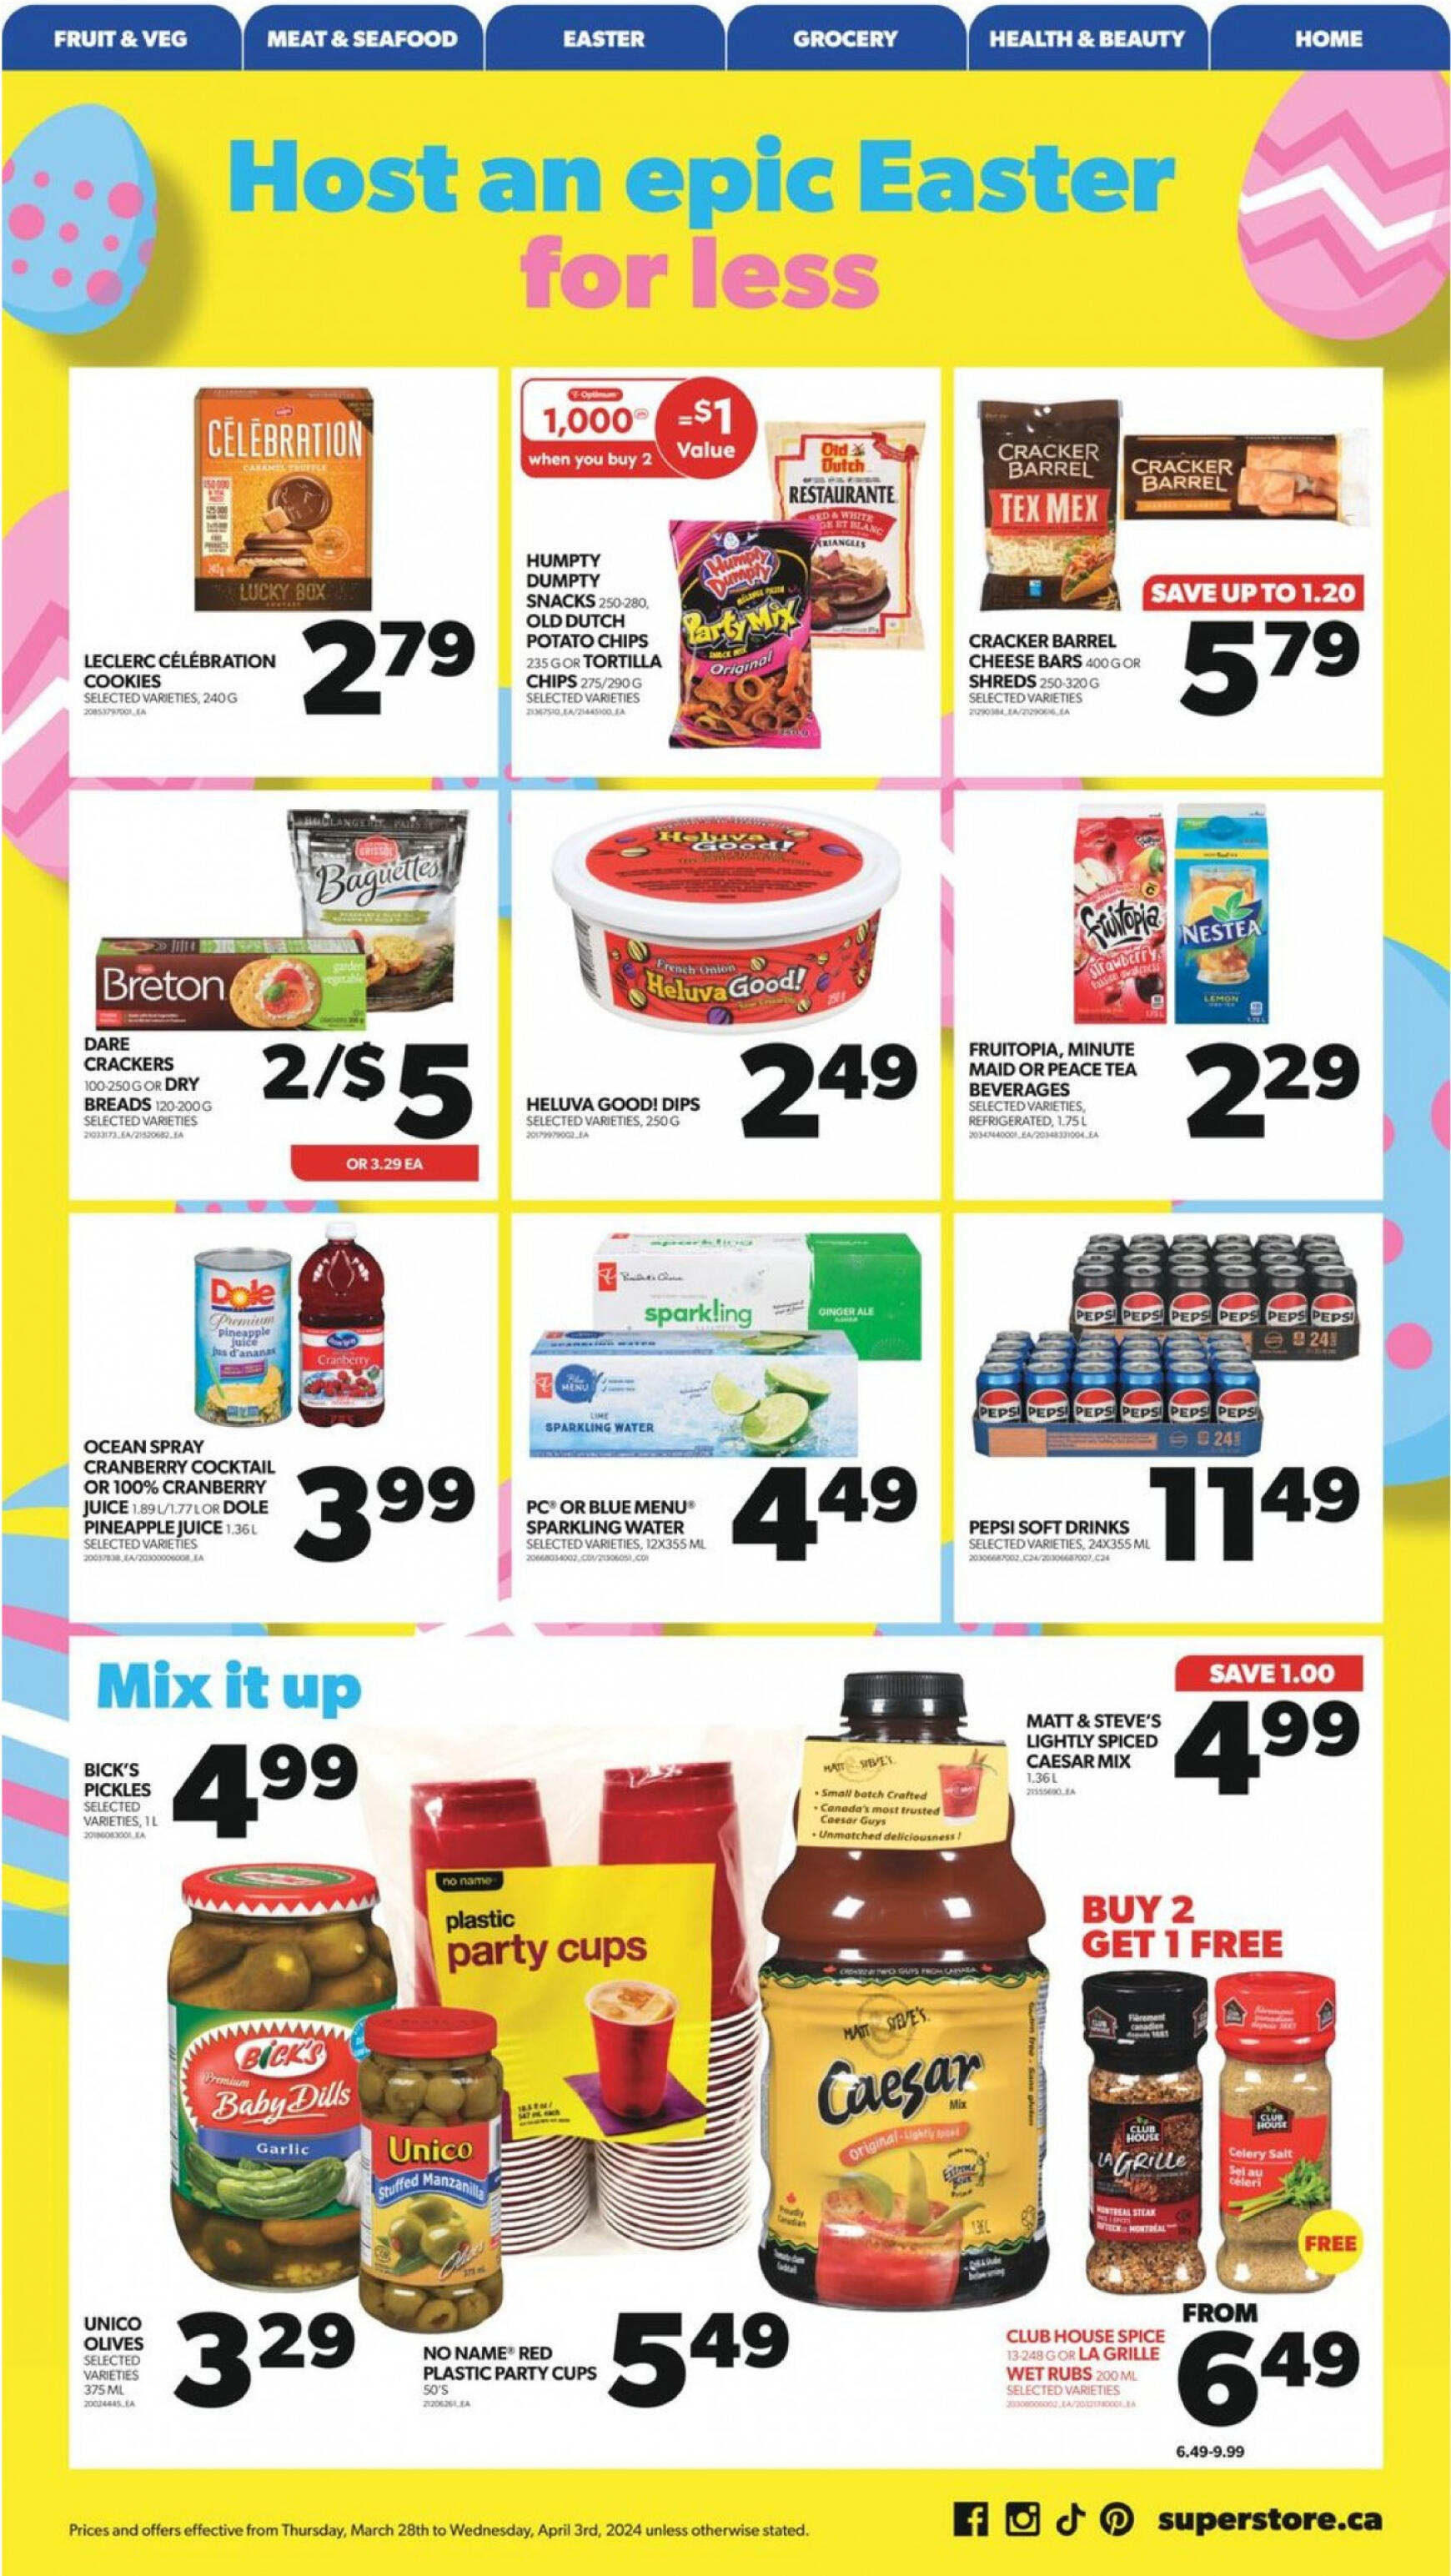 real-canadian-superstore - Real Canadian Superstore flyer current 28.03. - 03.04. - page: 6